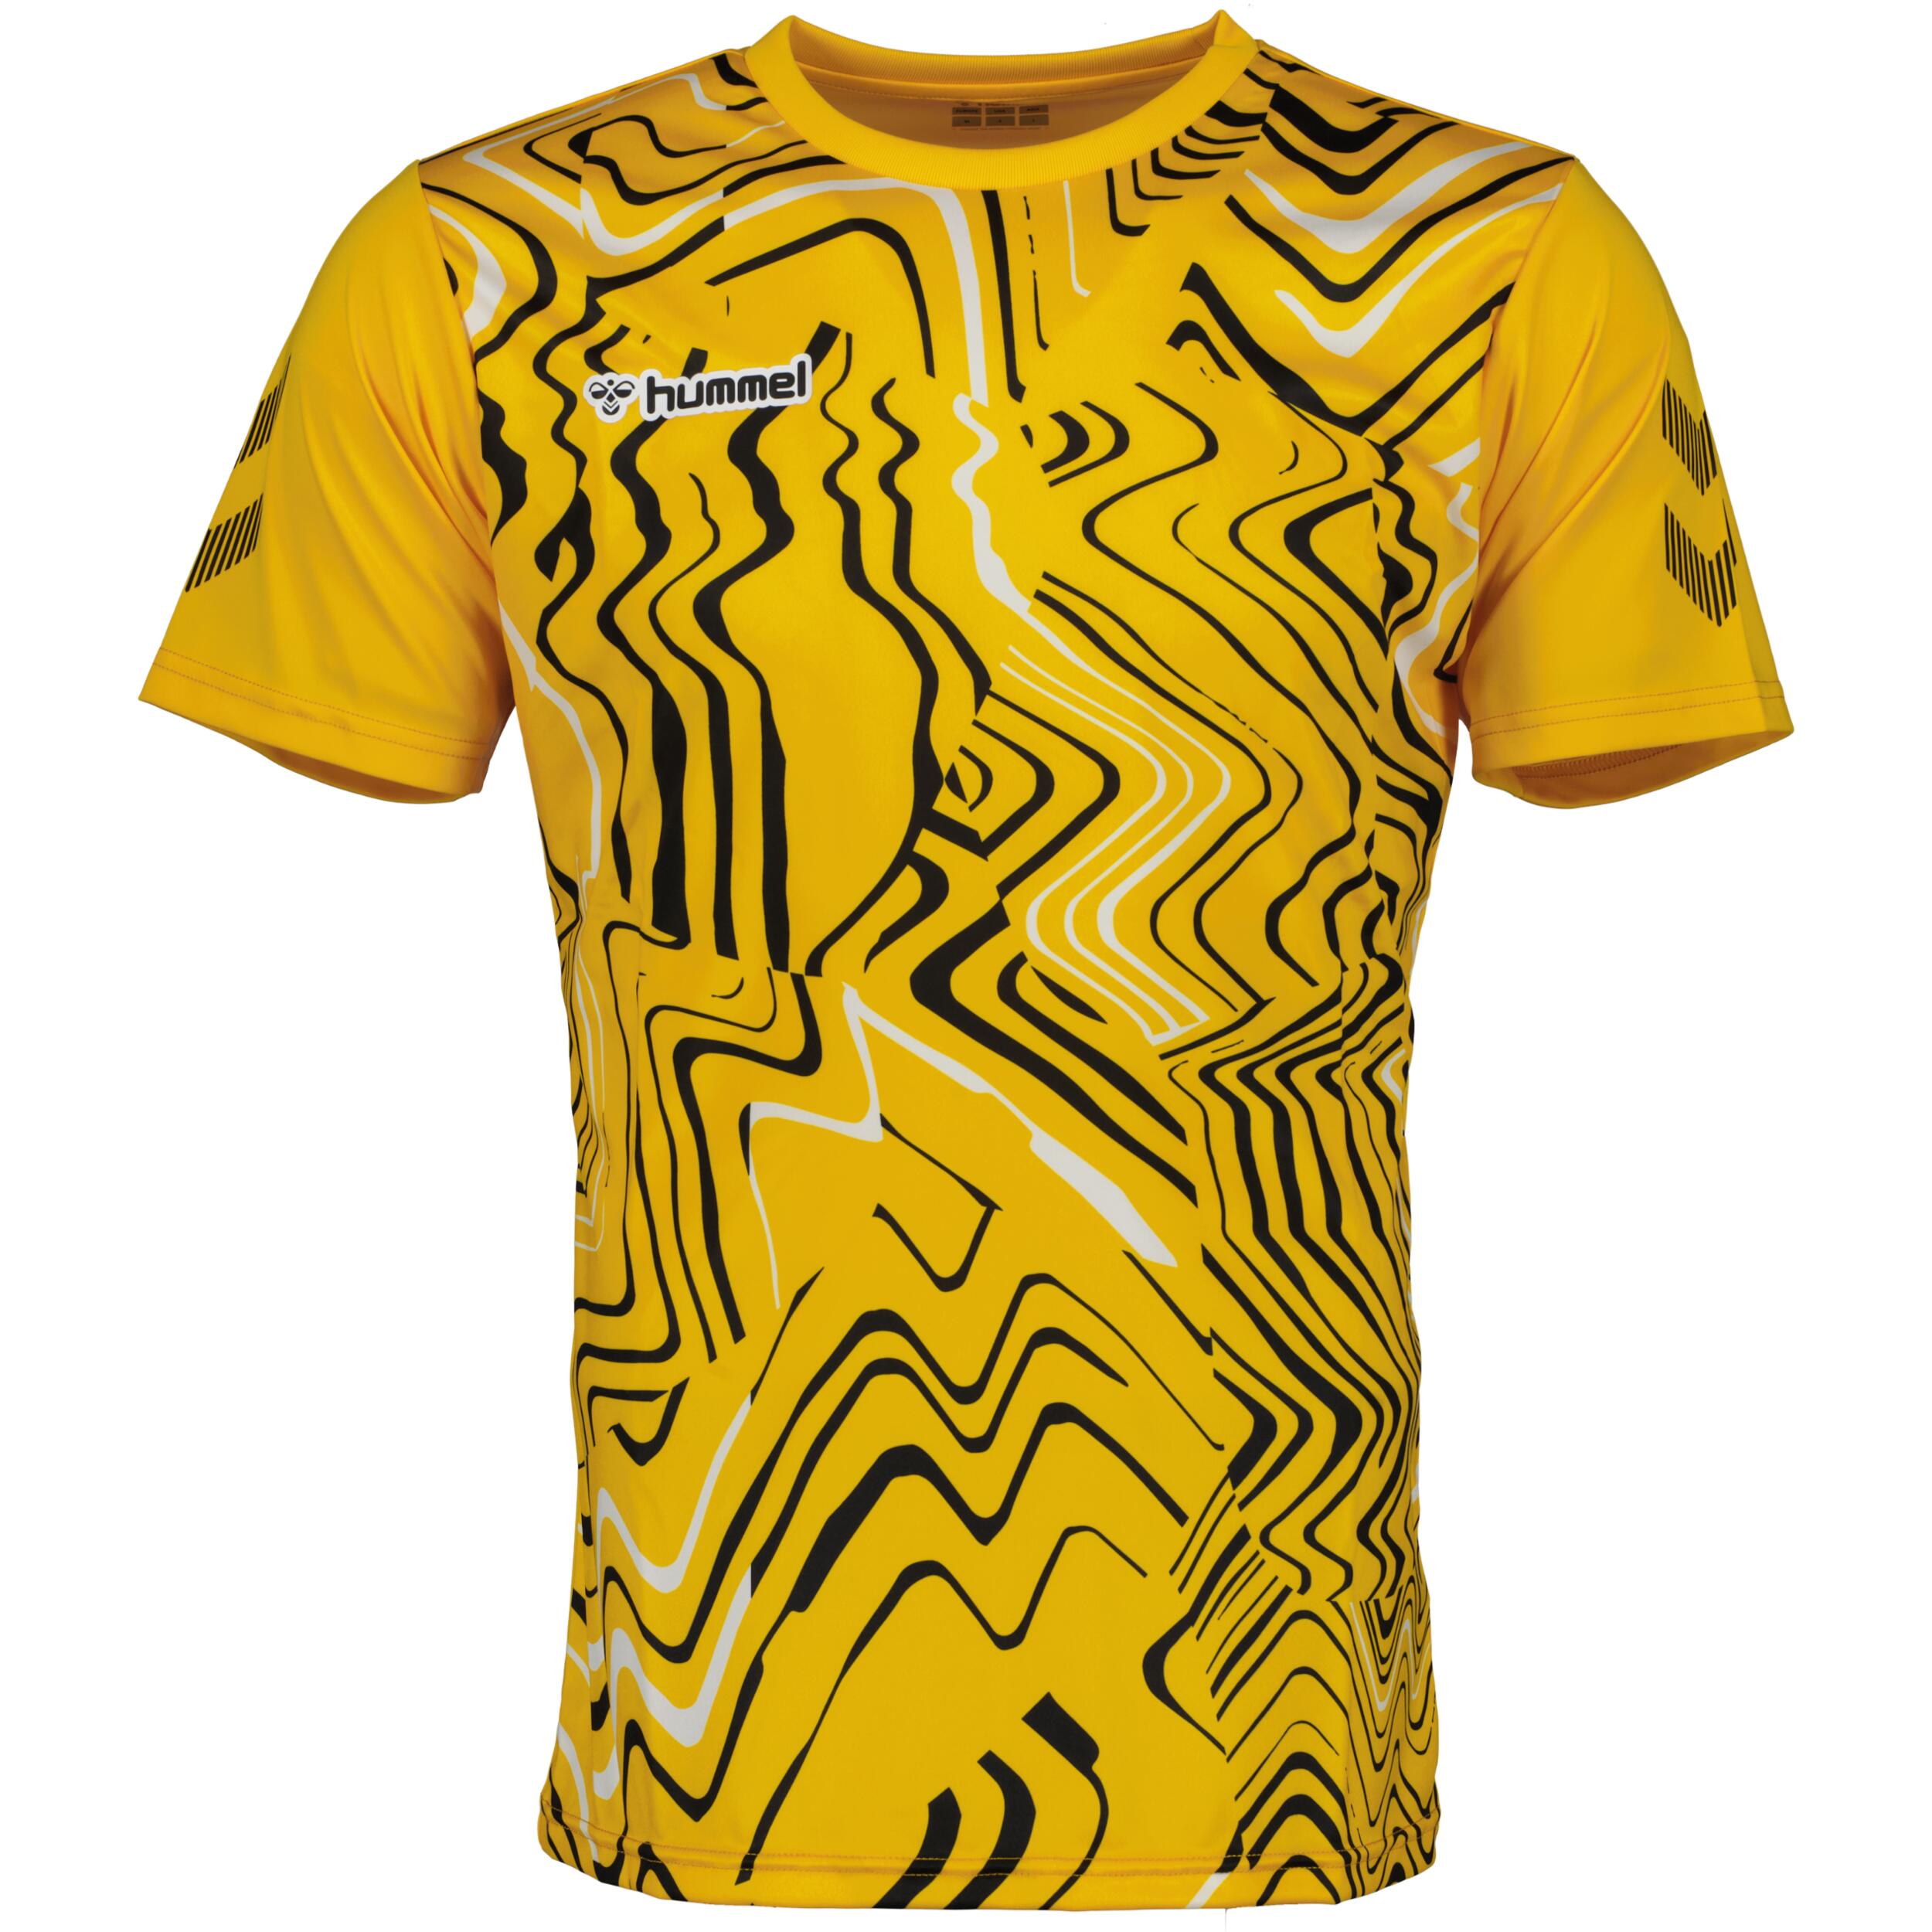 Hydro jersey for kids, great for football, in sports yellow/black/white 1/3